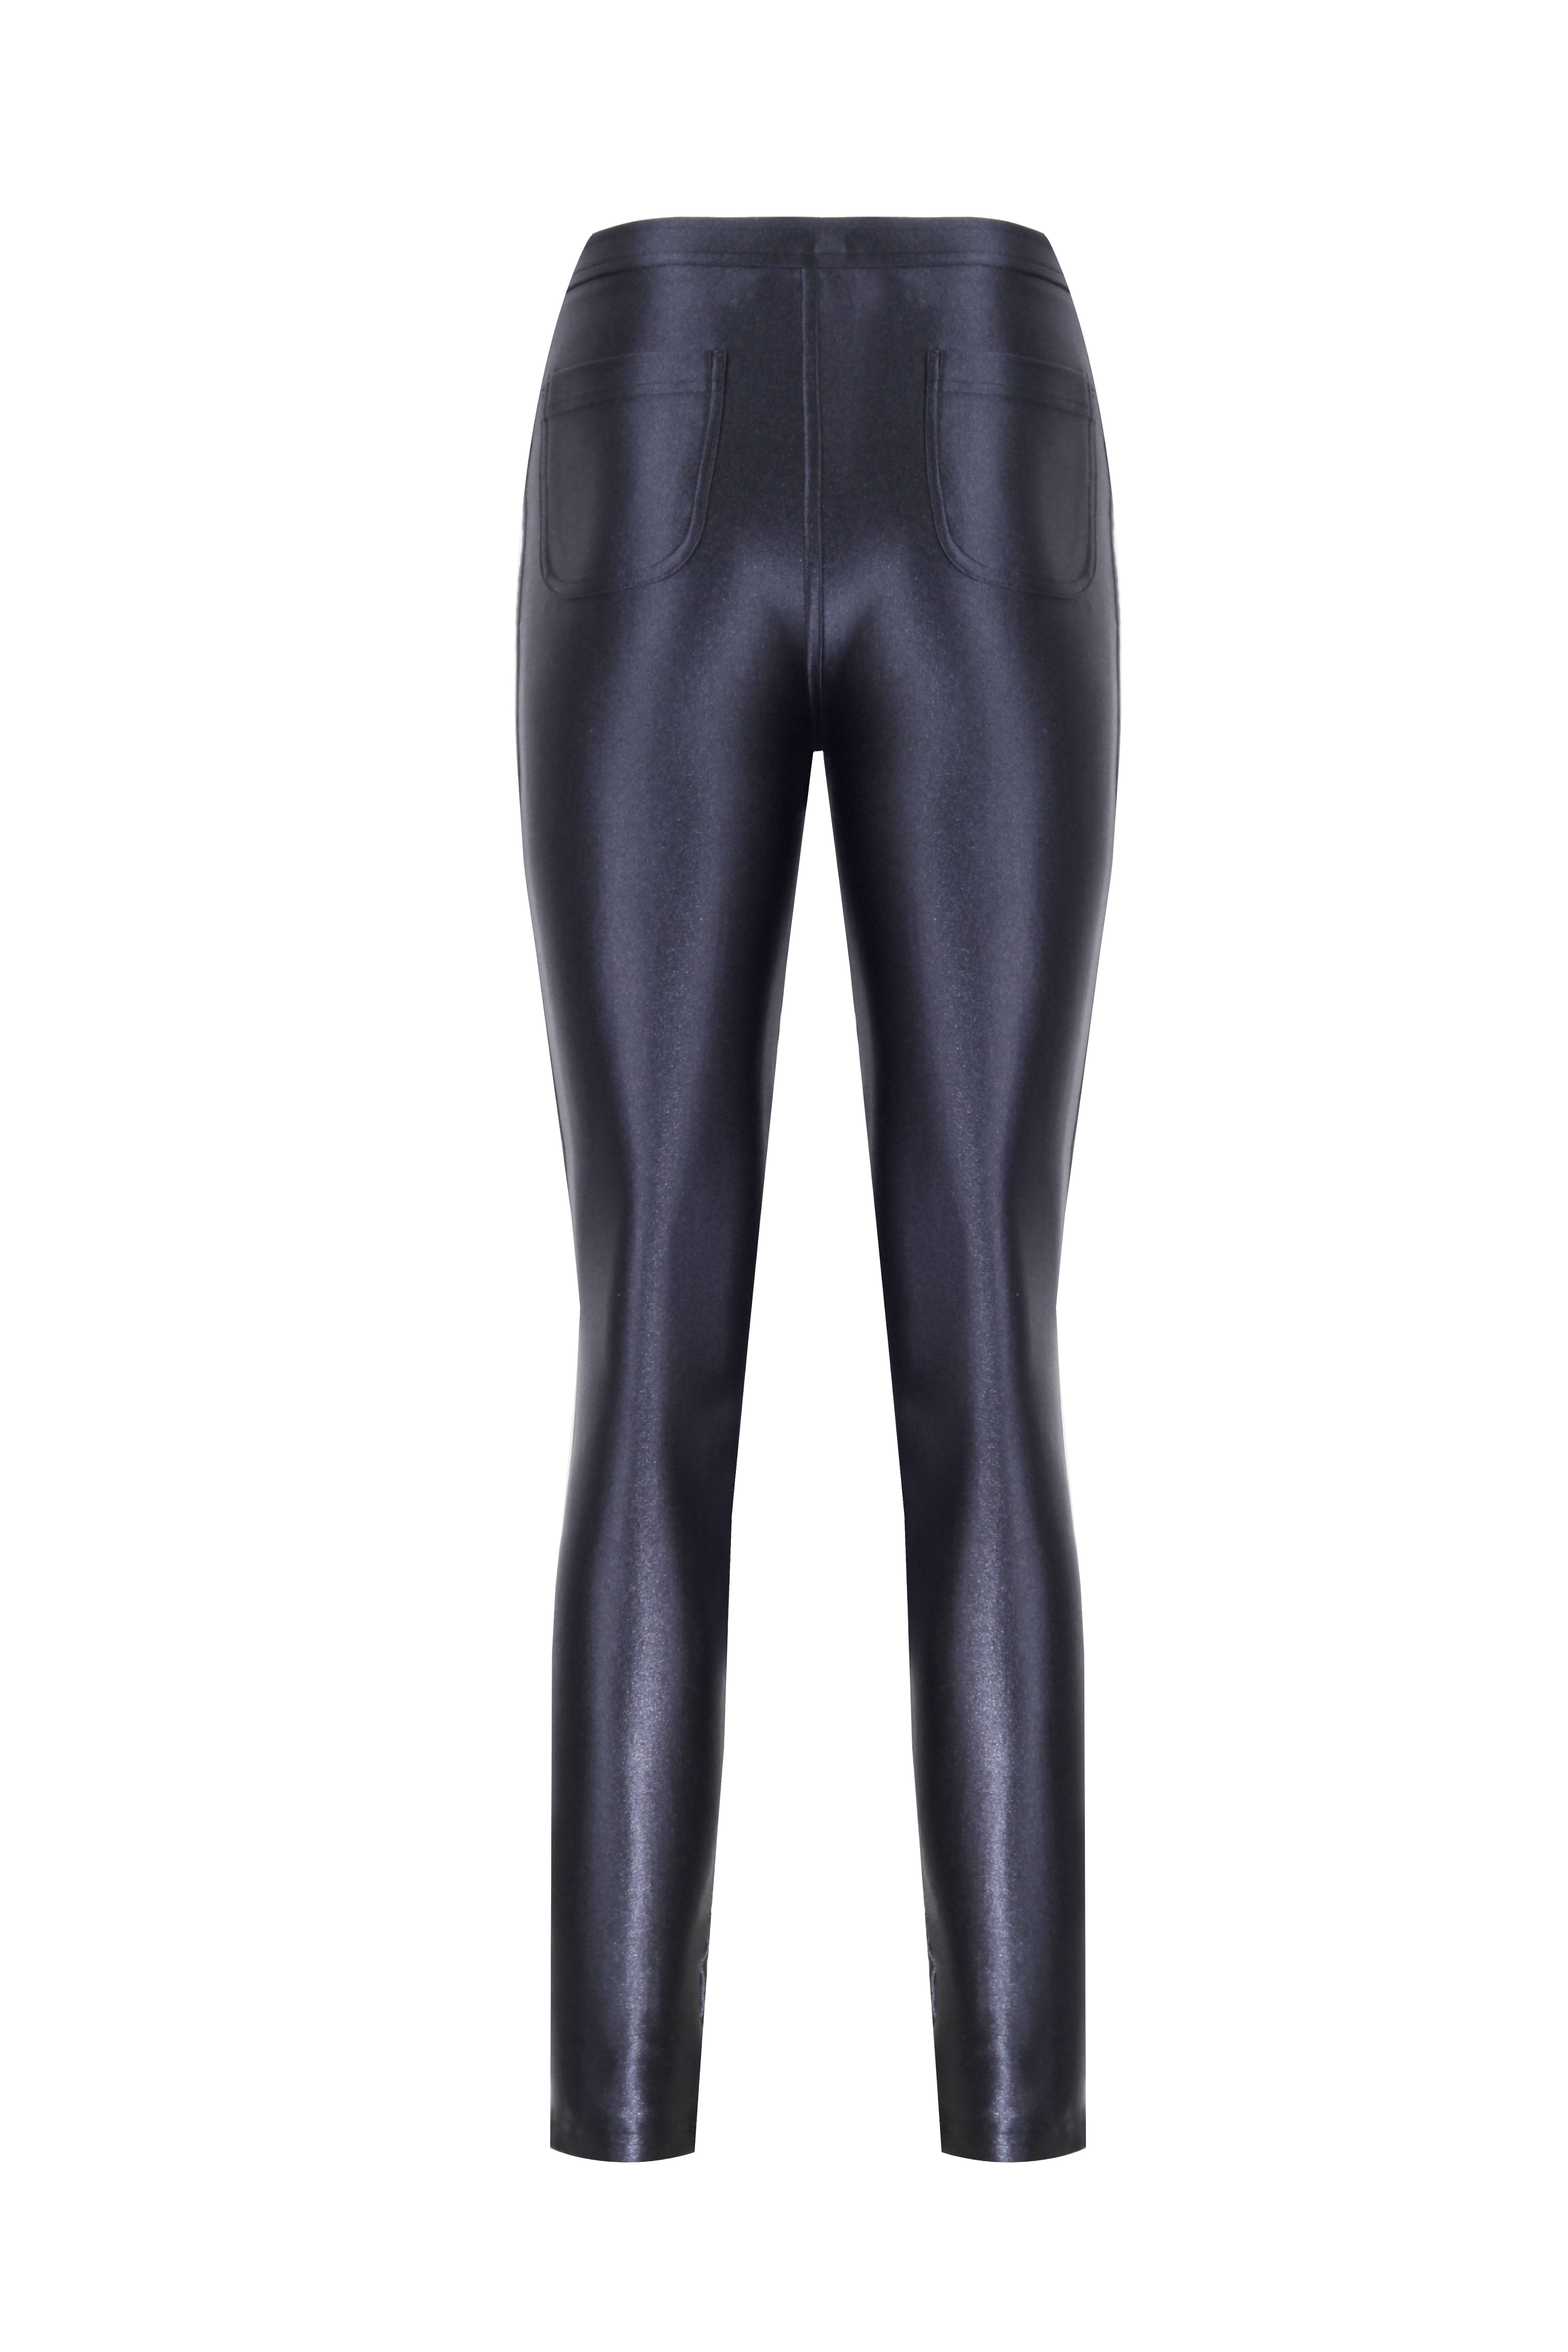 Cecile Anthracite Grey Shiny Pants